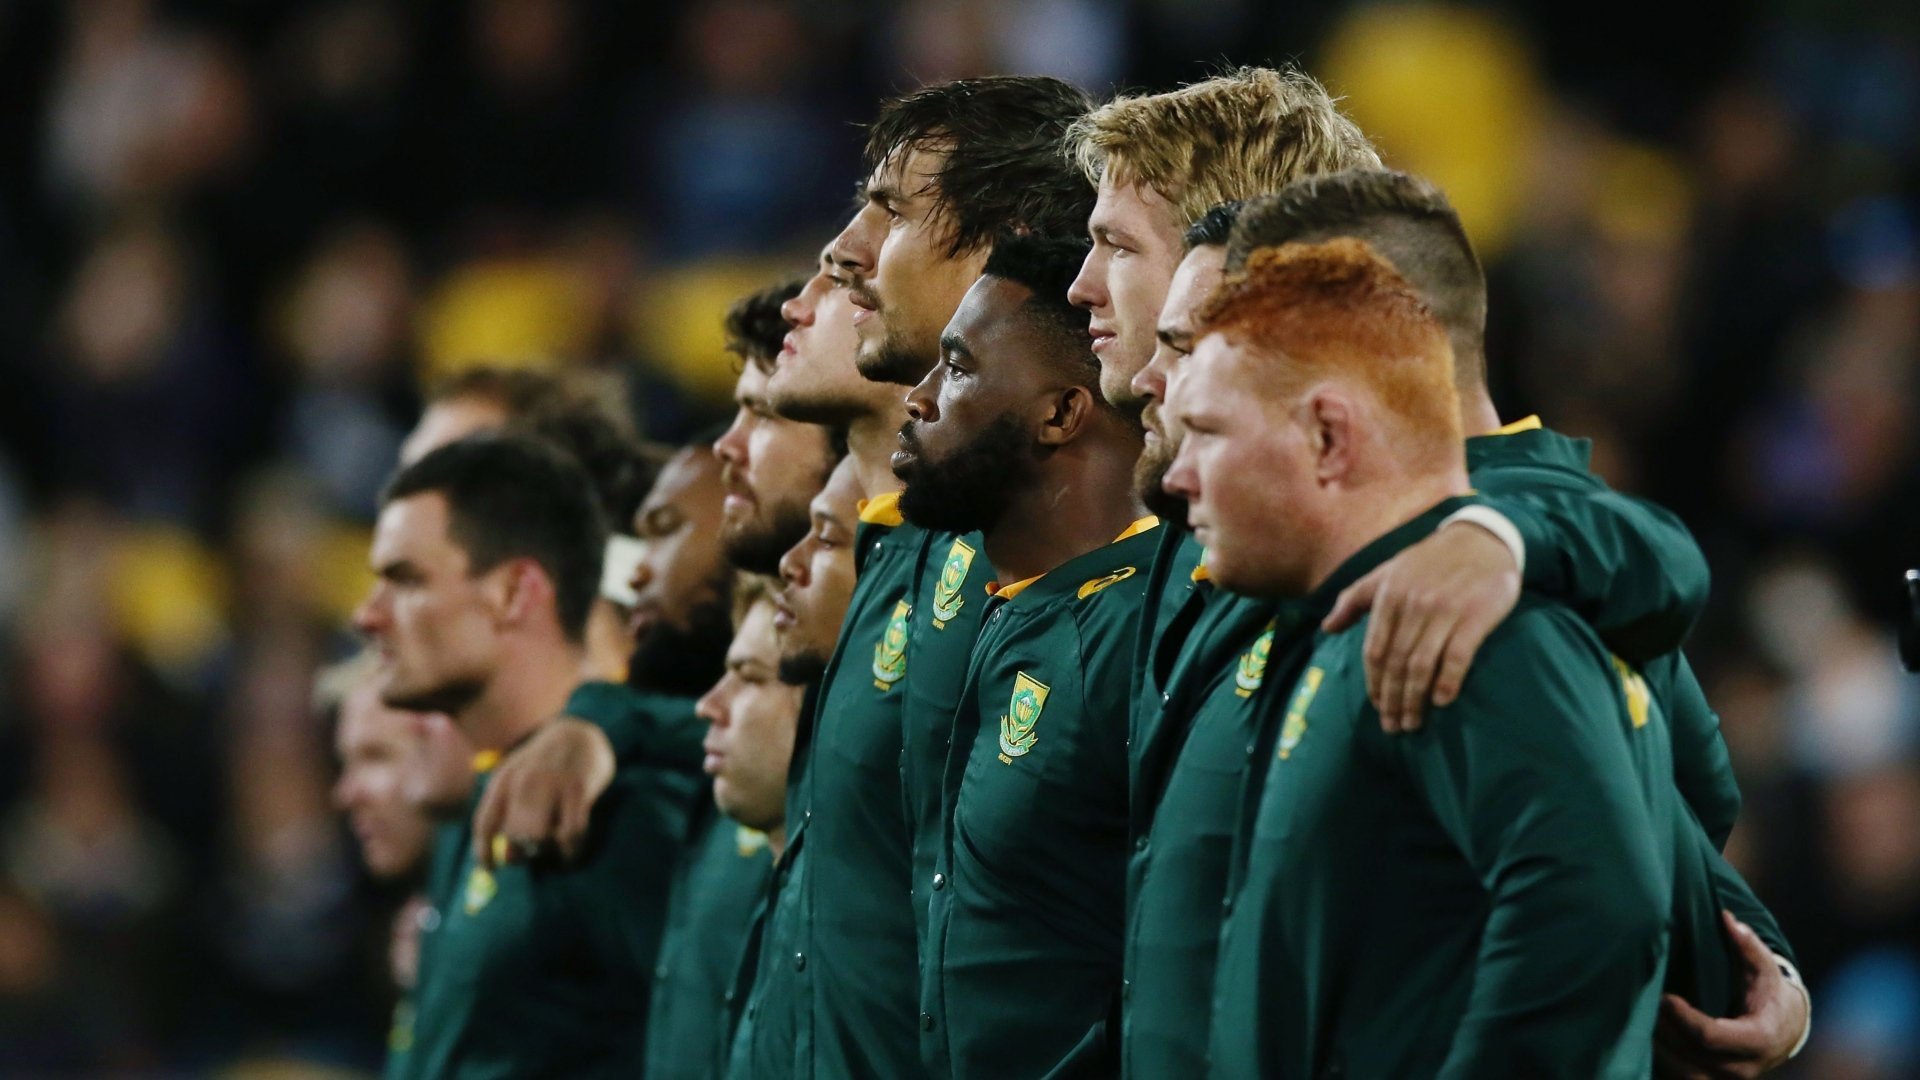 Springboks Sign 6 Year Deal With Nike